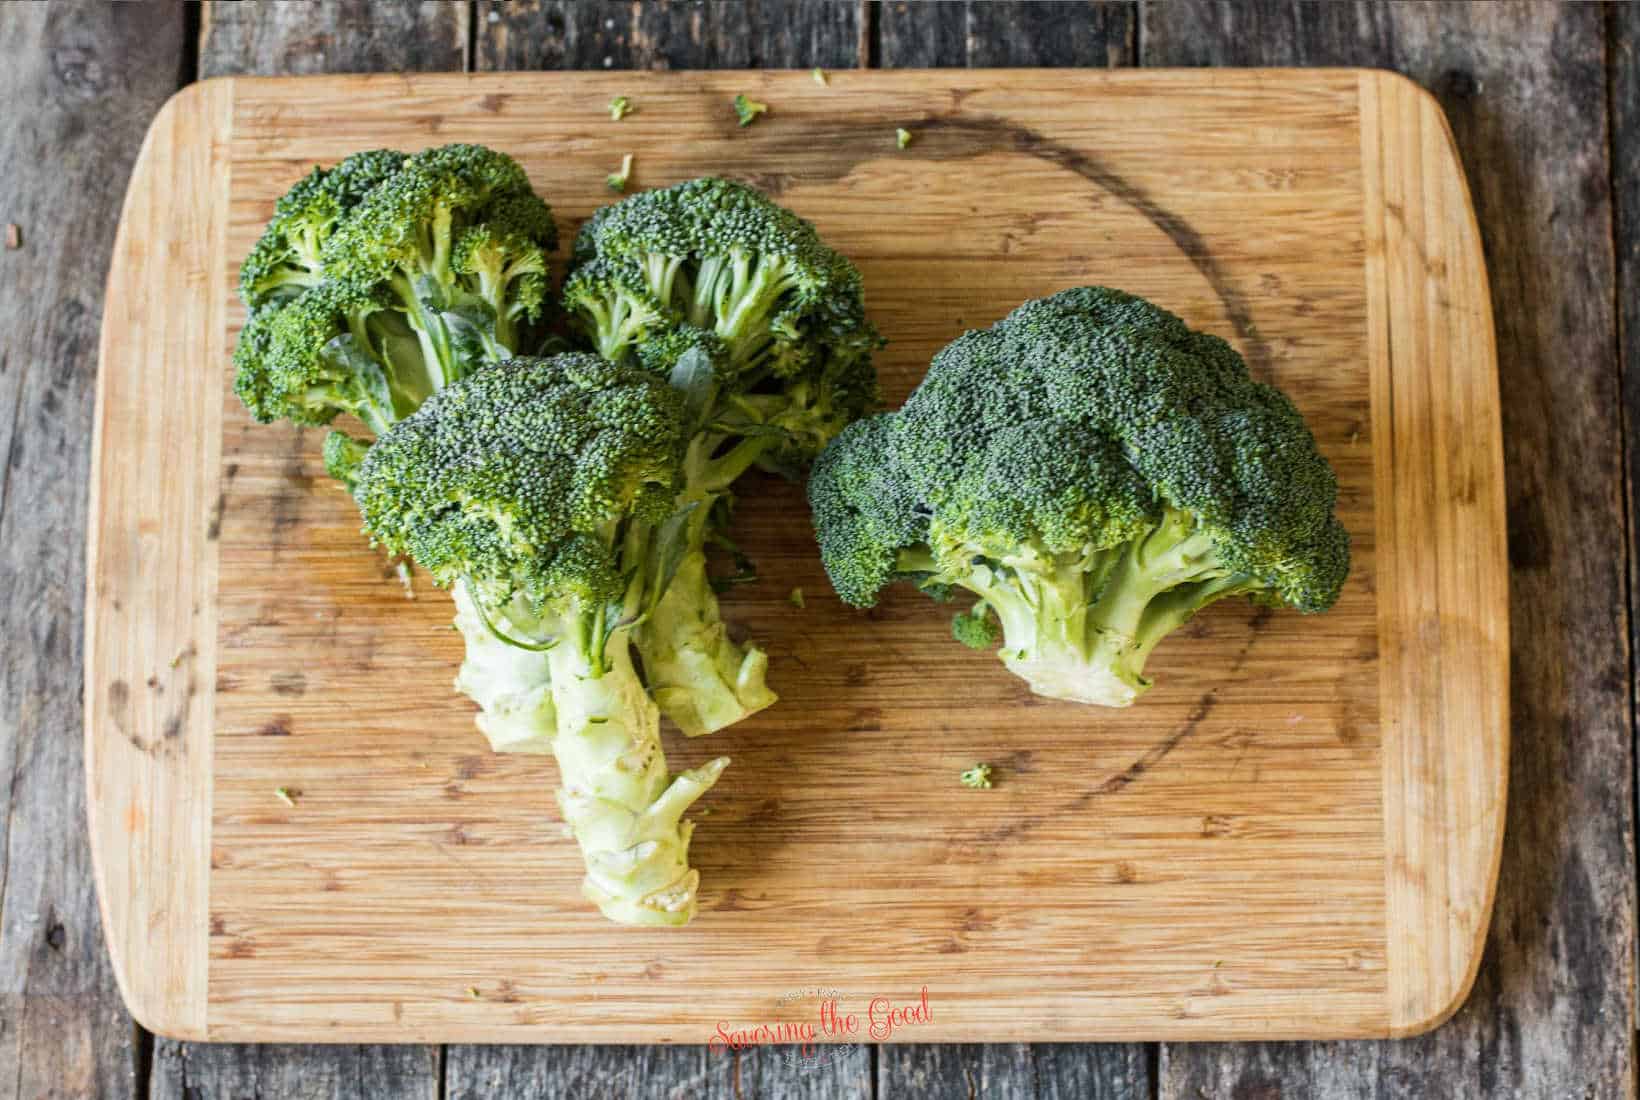 broccoli crown and broccoli crown with long stem